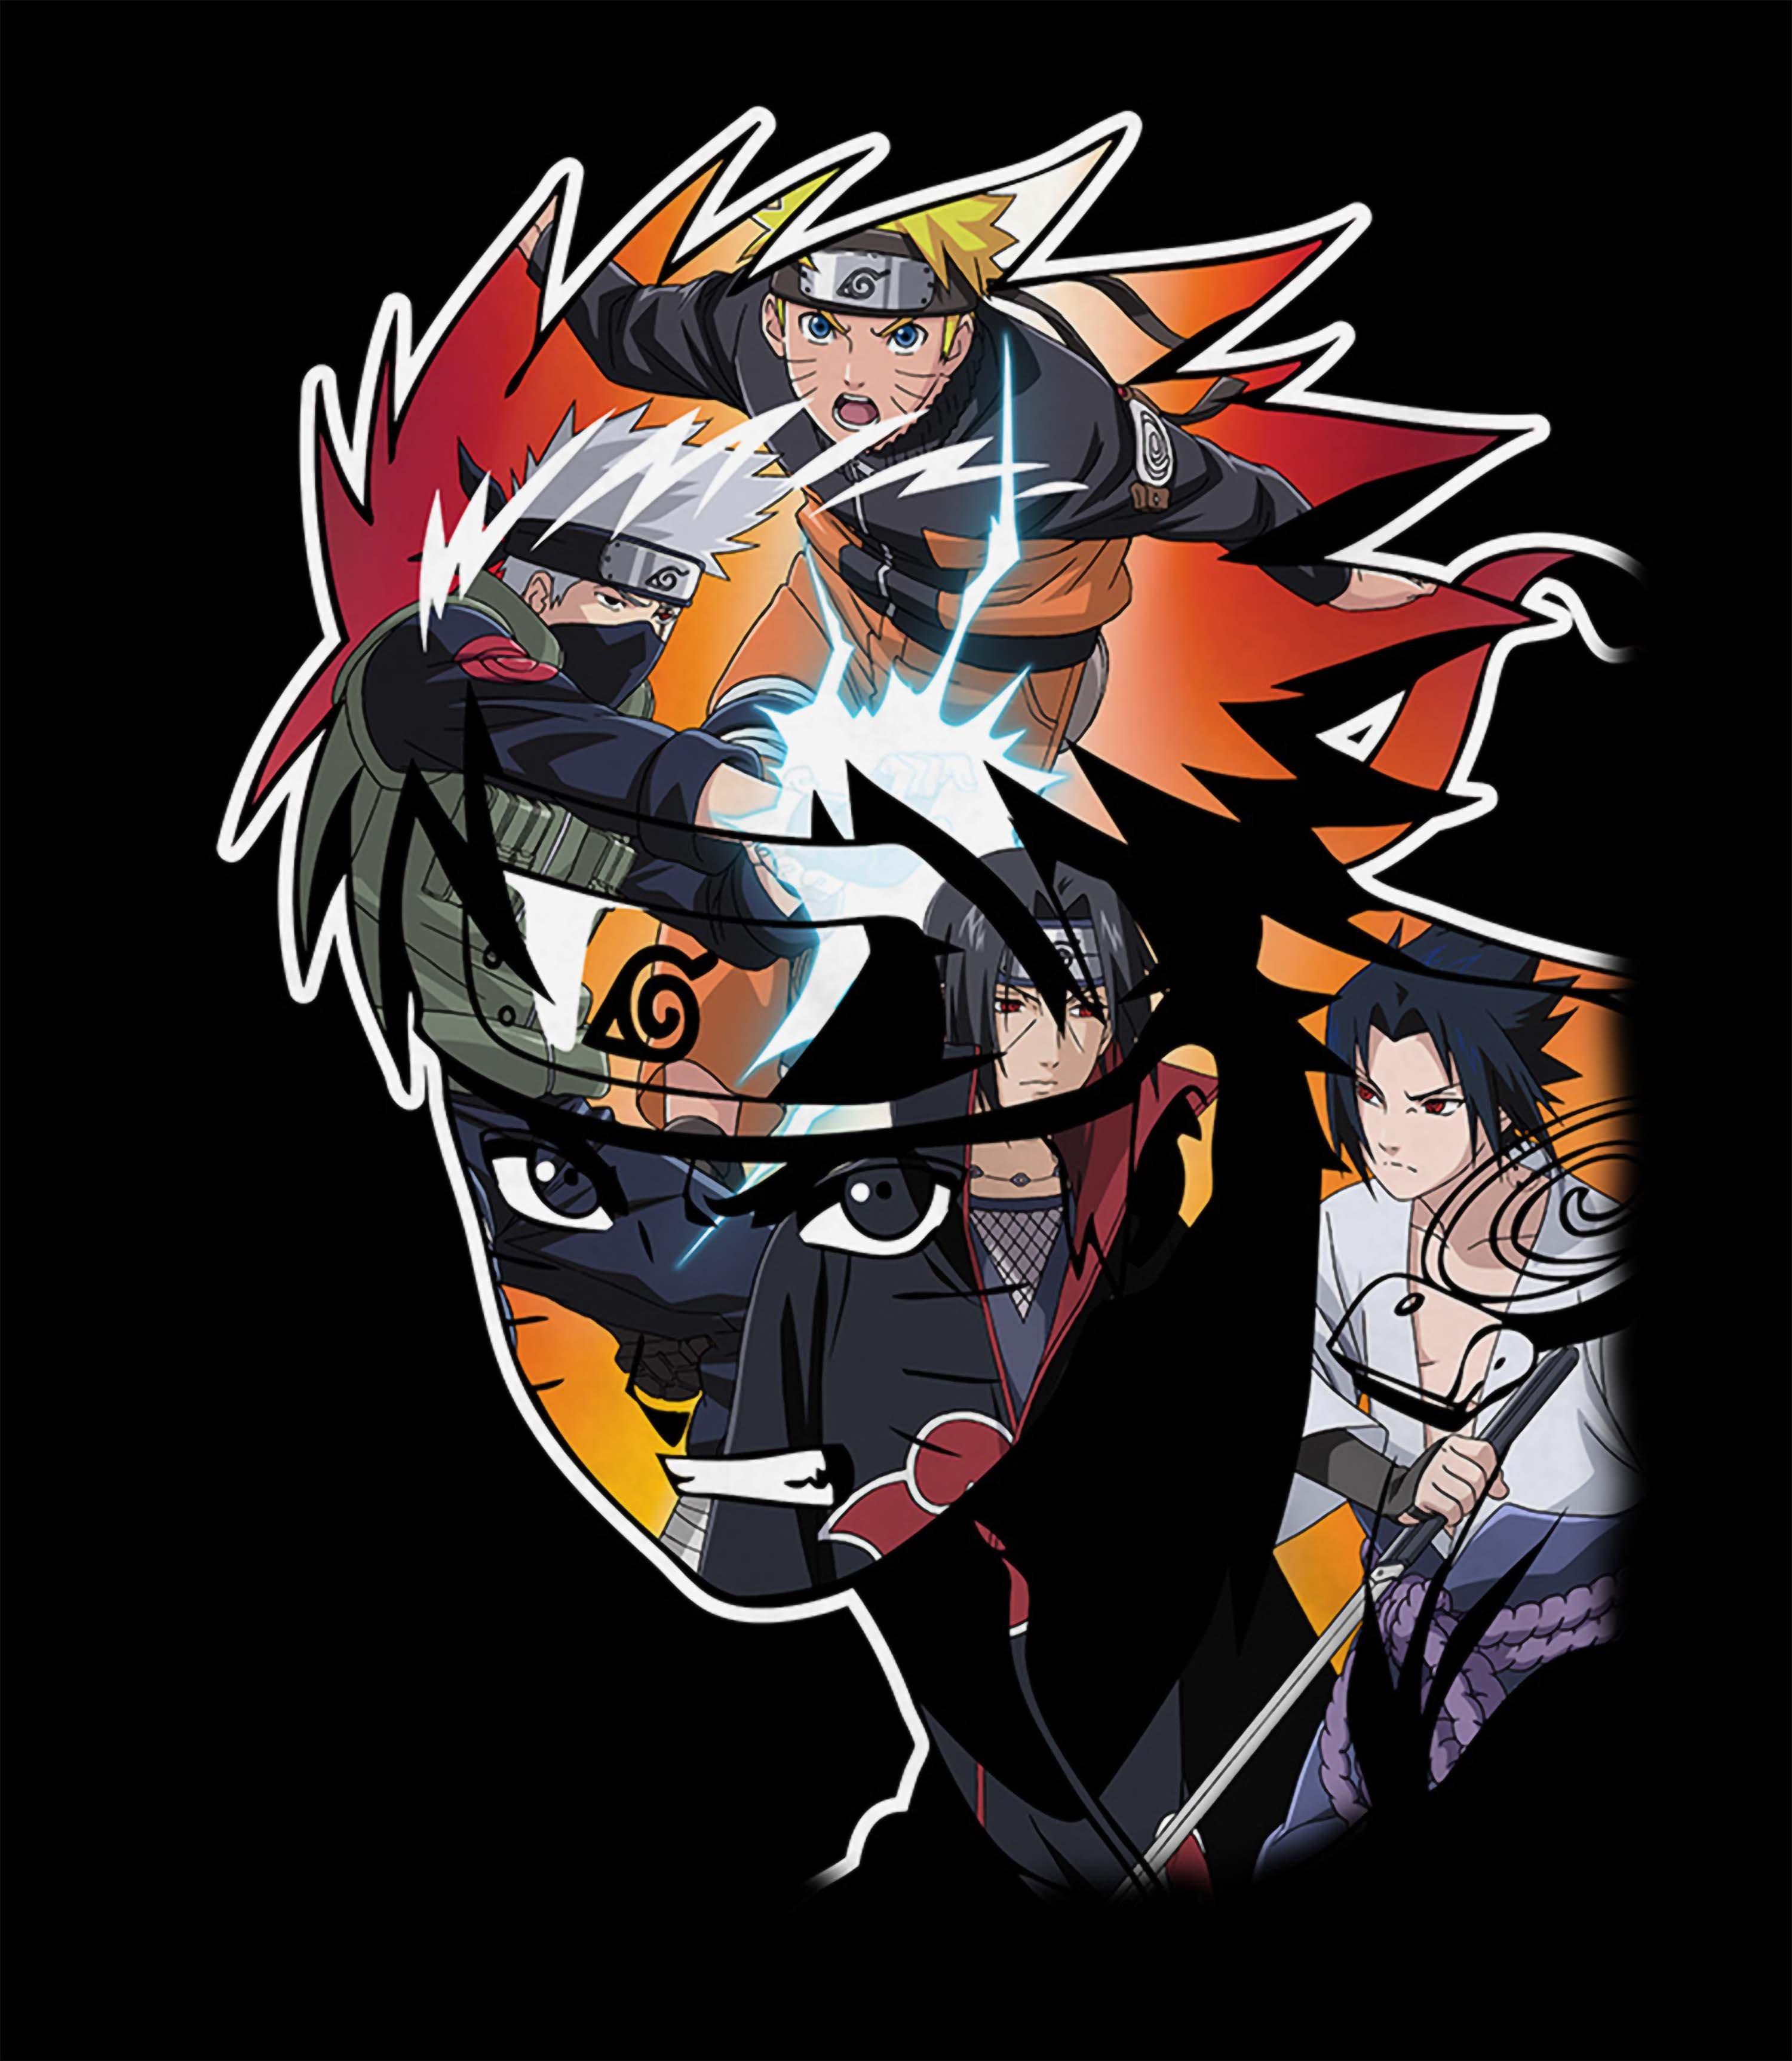 Shippuden Characters Collage Unisex T-Shirt |